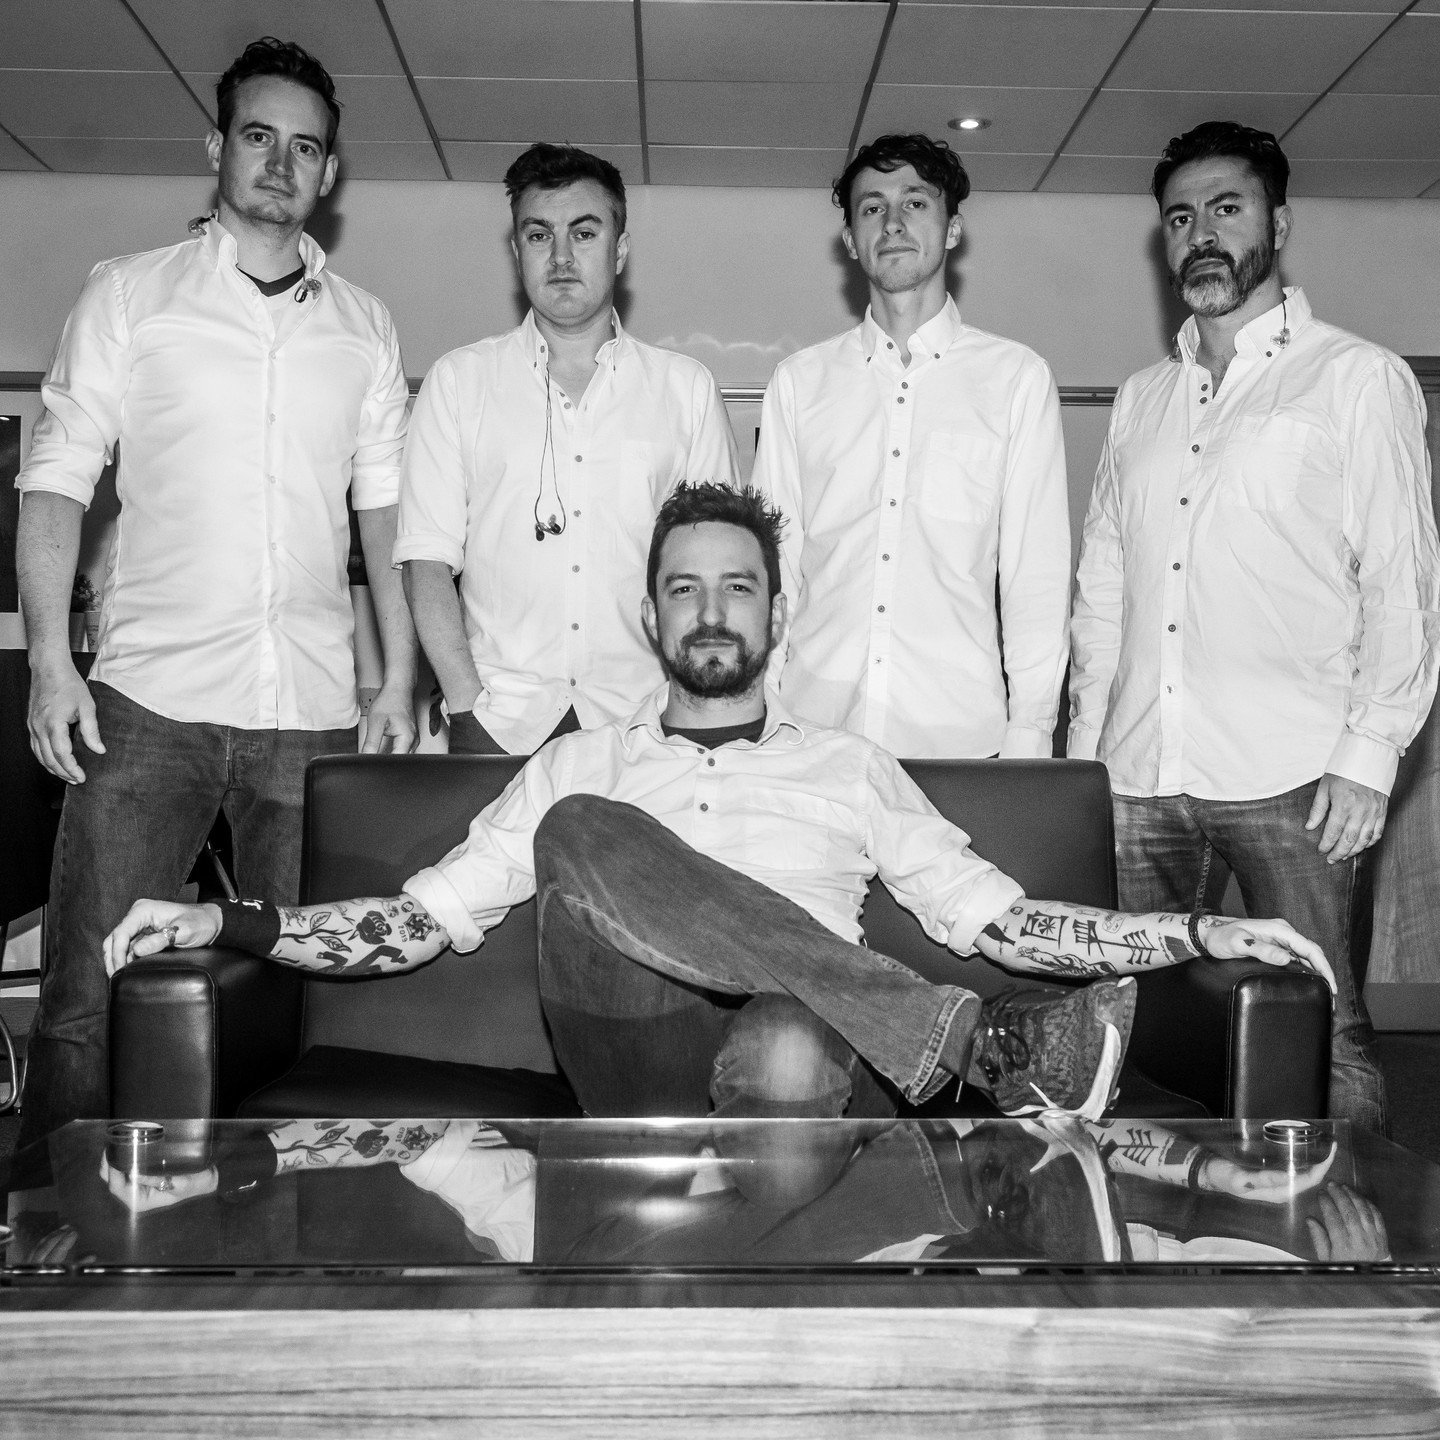 JUST IN: @frankturner &amp; The Sleeping Souls bring the Undefeated Canadian Tour to our stage on September 3rd! Grab tickets this Friday at 10am (local time).